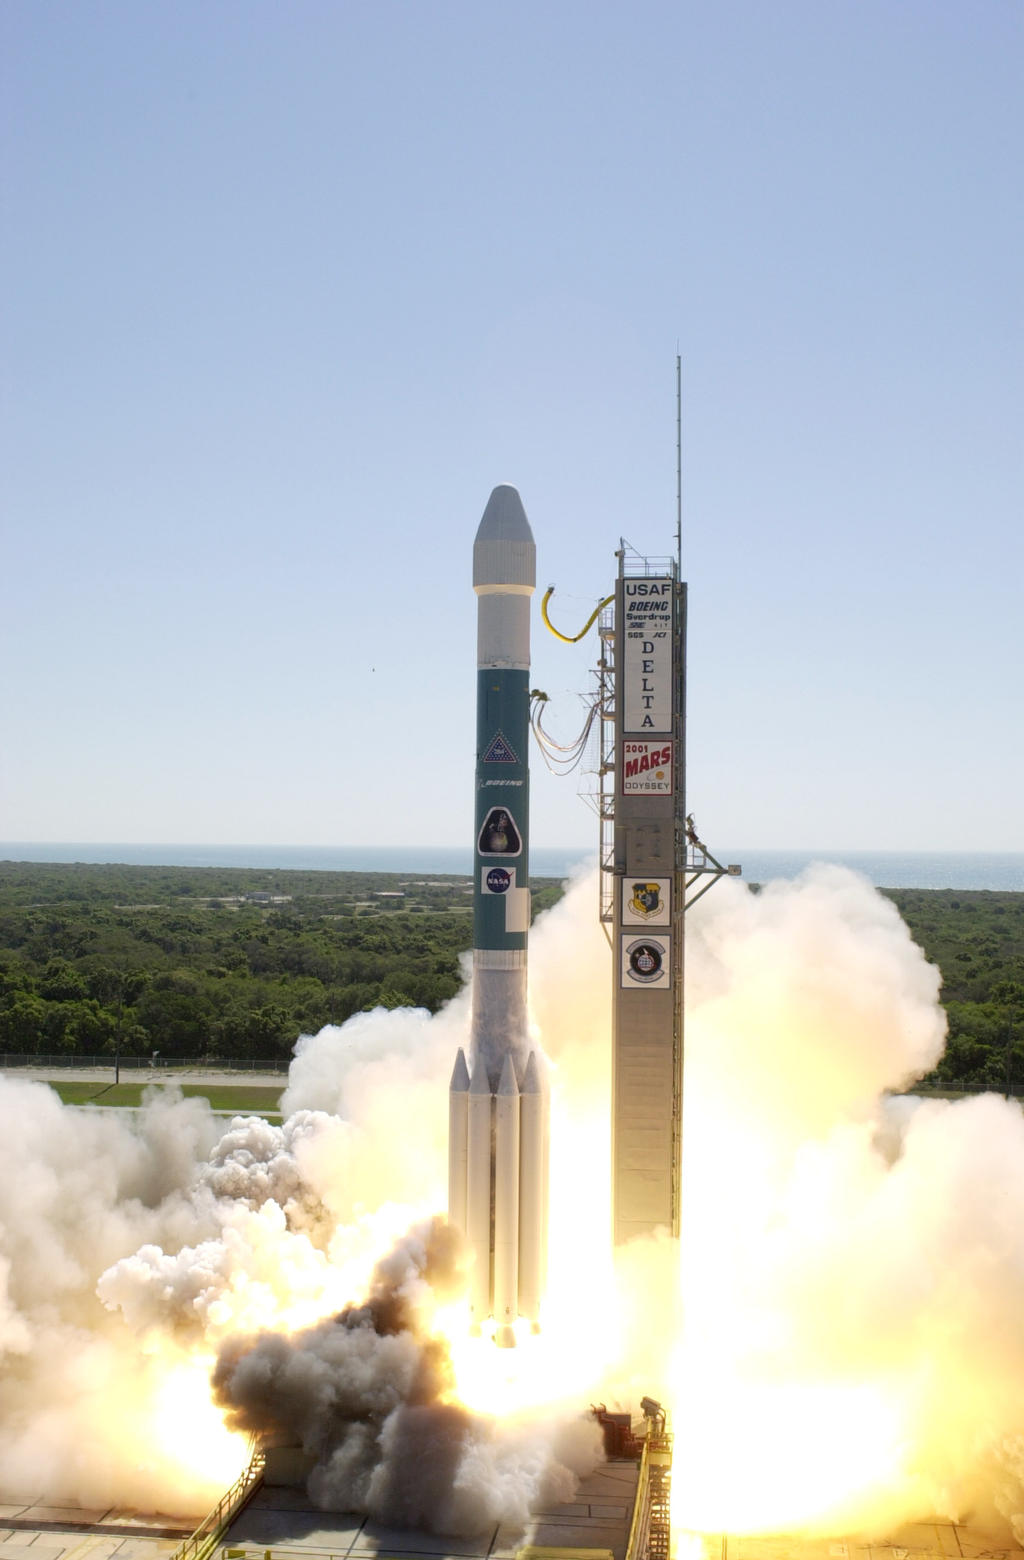 Odyssey launched on Boeing's Delta II 7925 that uses nine strap-on solid rocket motors.